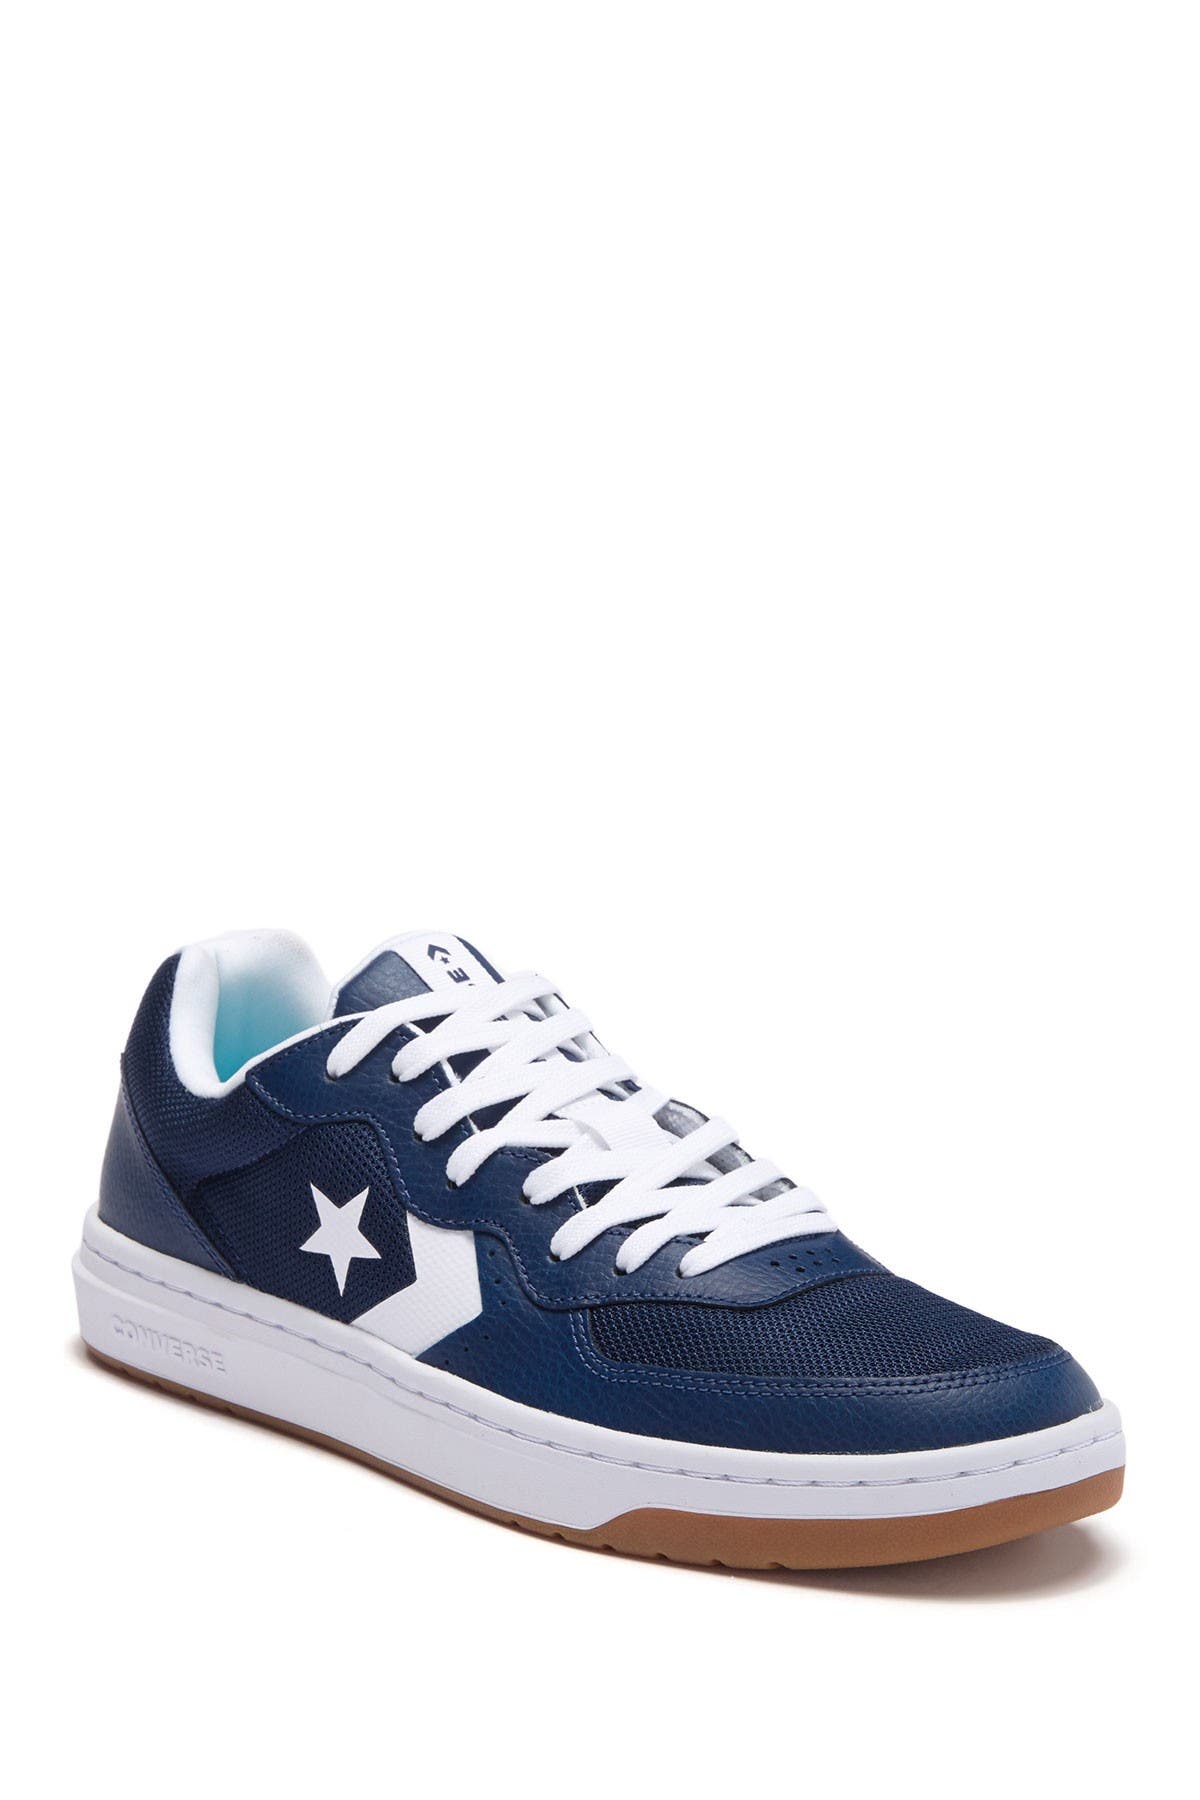 converse rival low top